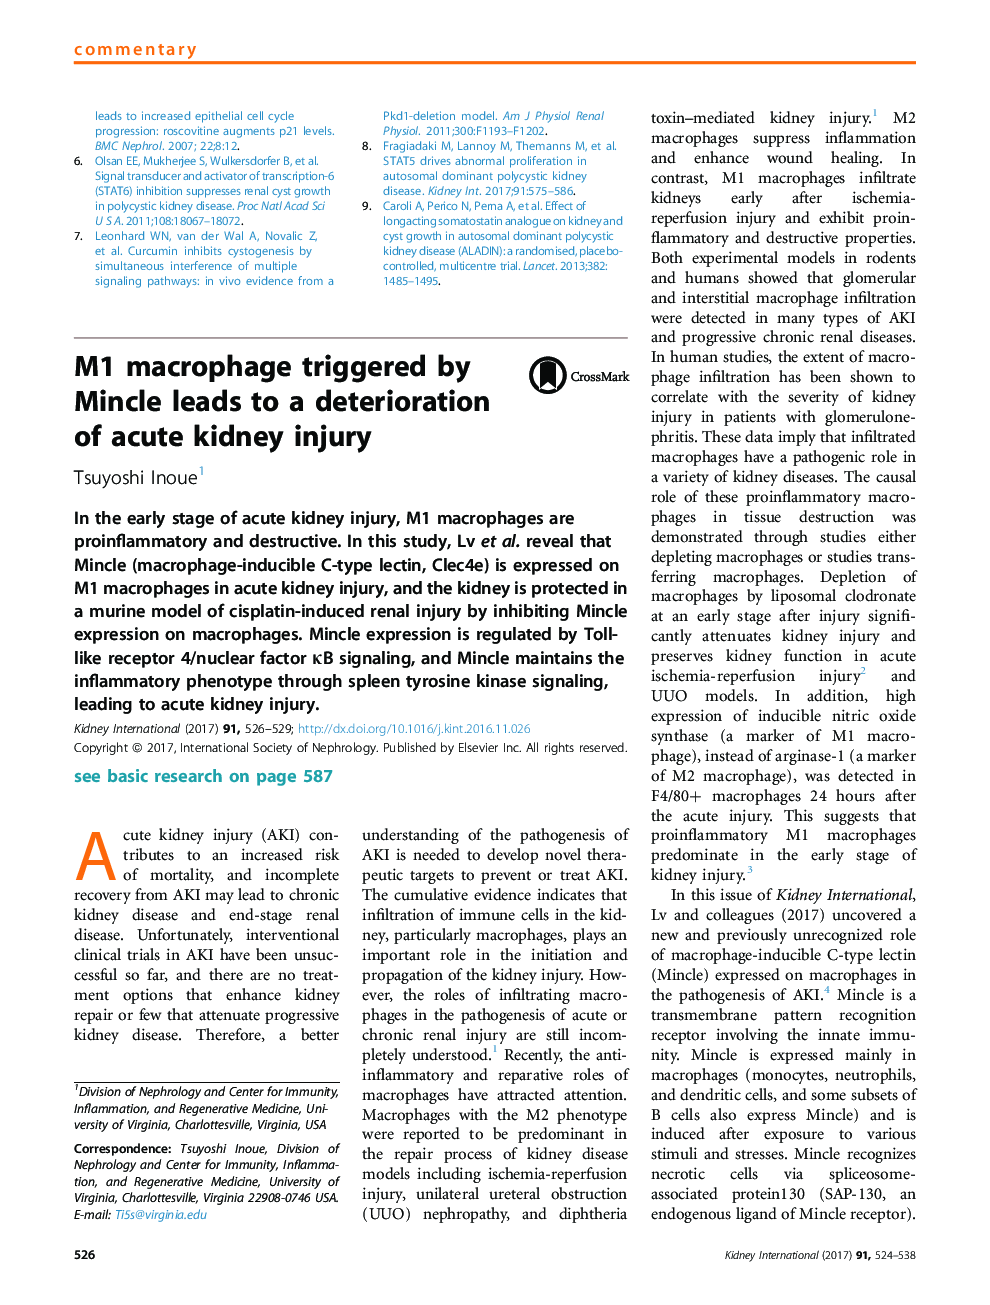 M1 macrophage triggered by Mincle leads to a deterioration of acute kidney injury